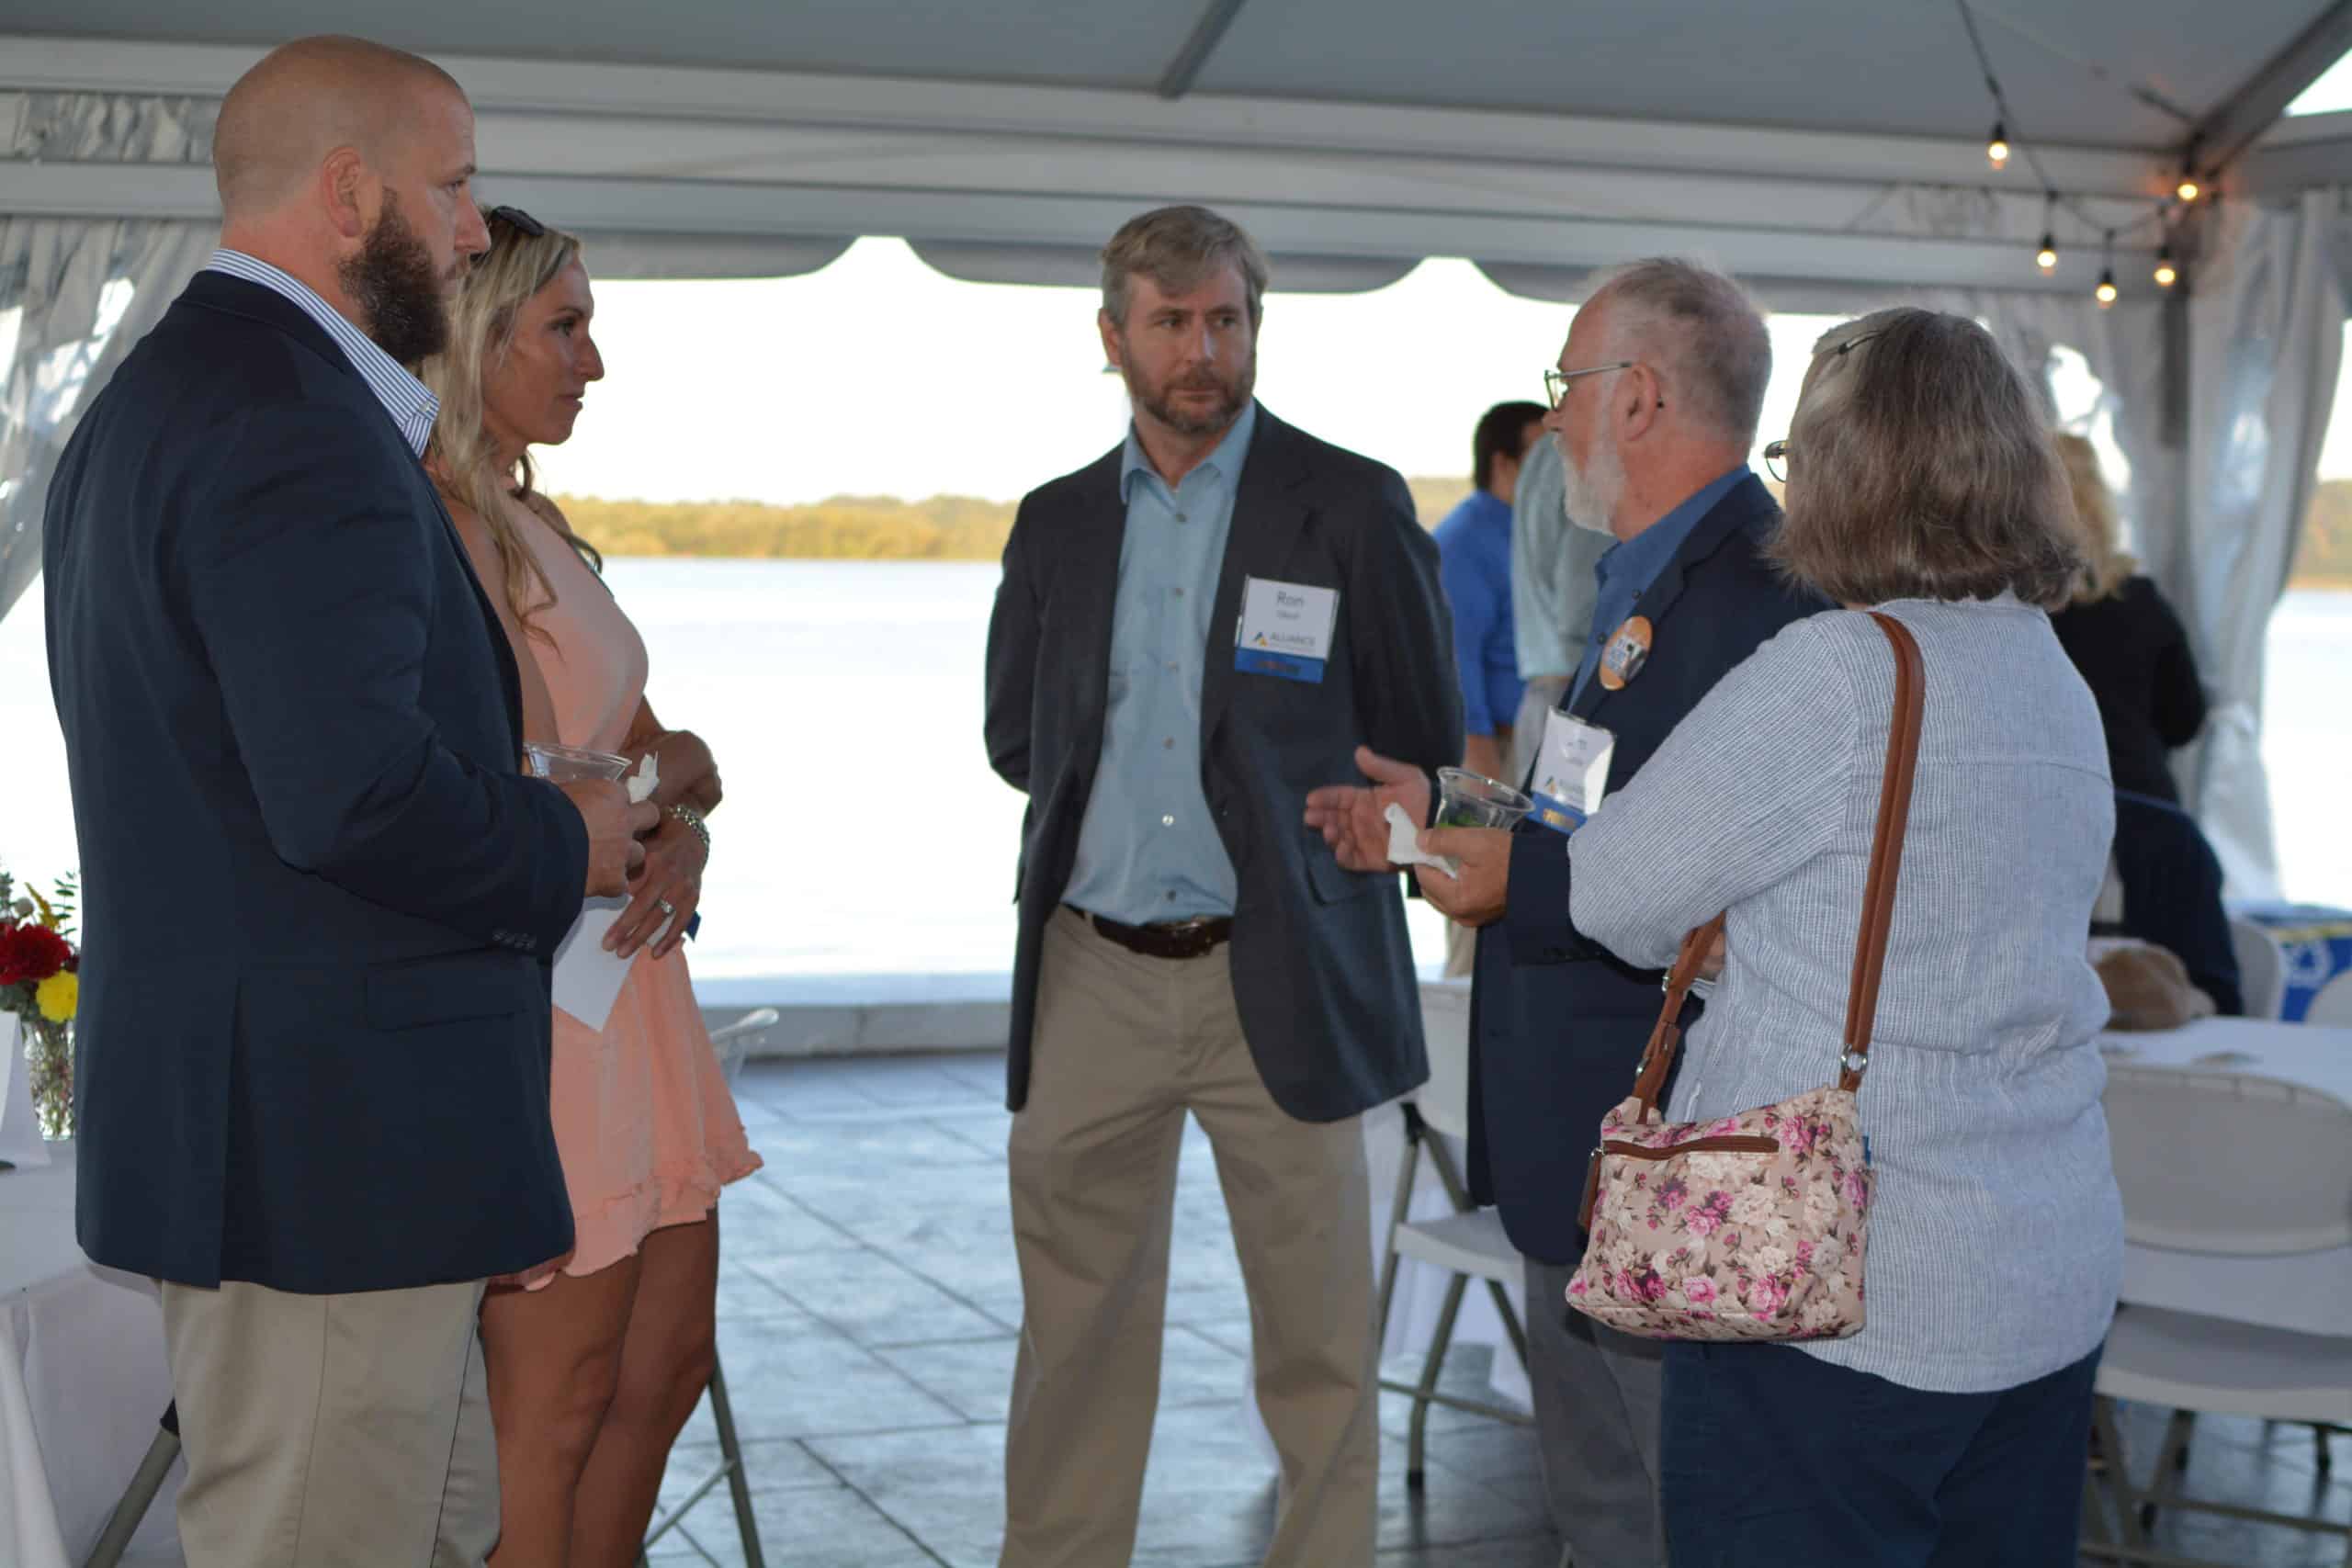 Dairy Farmers Talk Environmental Issues at ‘Taste of the Chesapeake’ Event